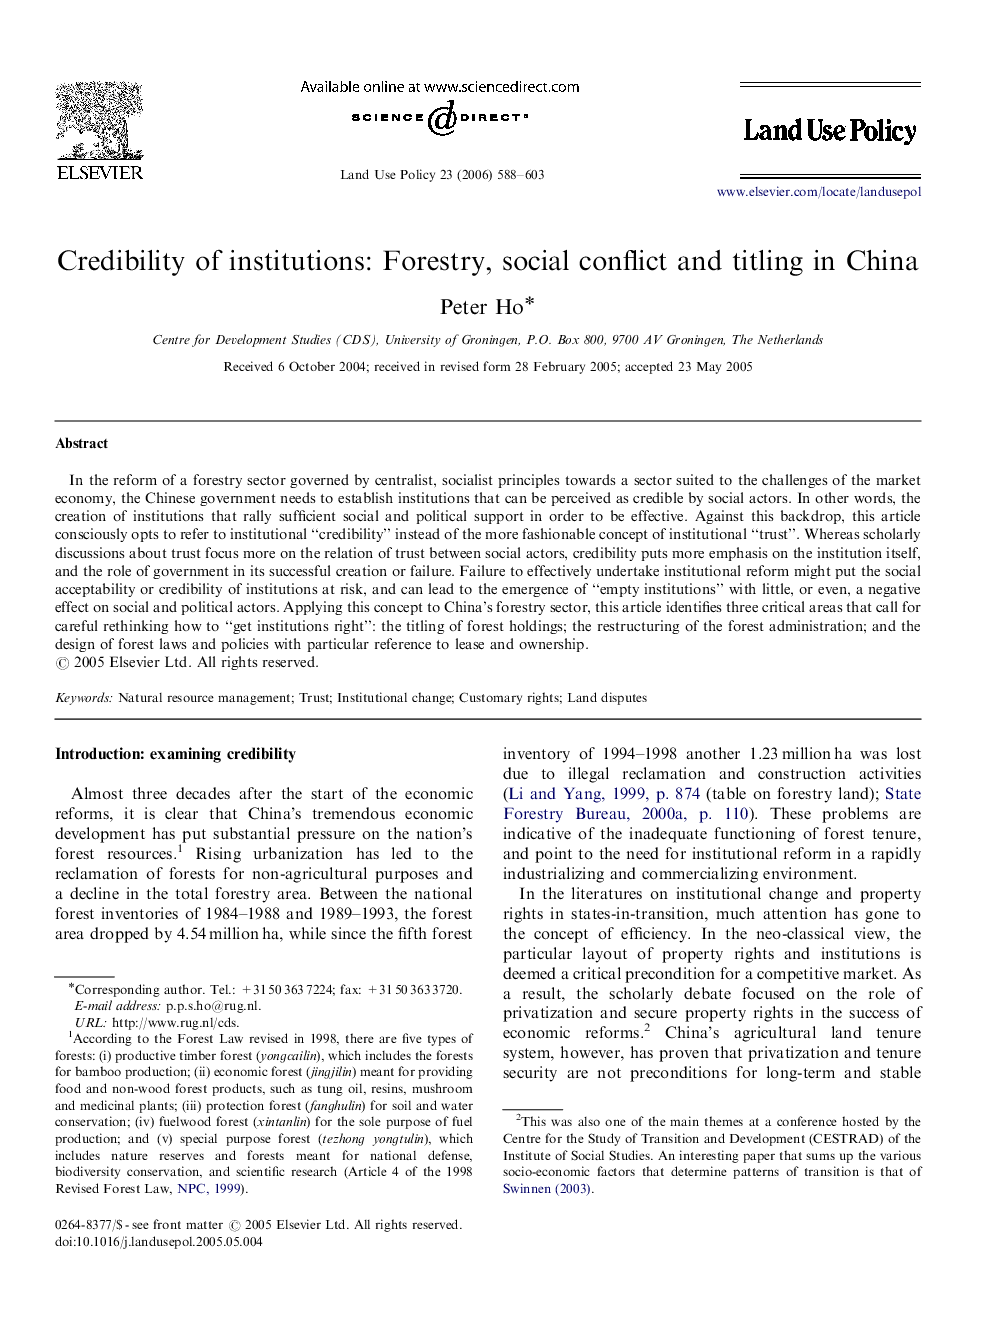 Credibility of institutions: Forestry, social conflict and titling in China